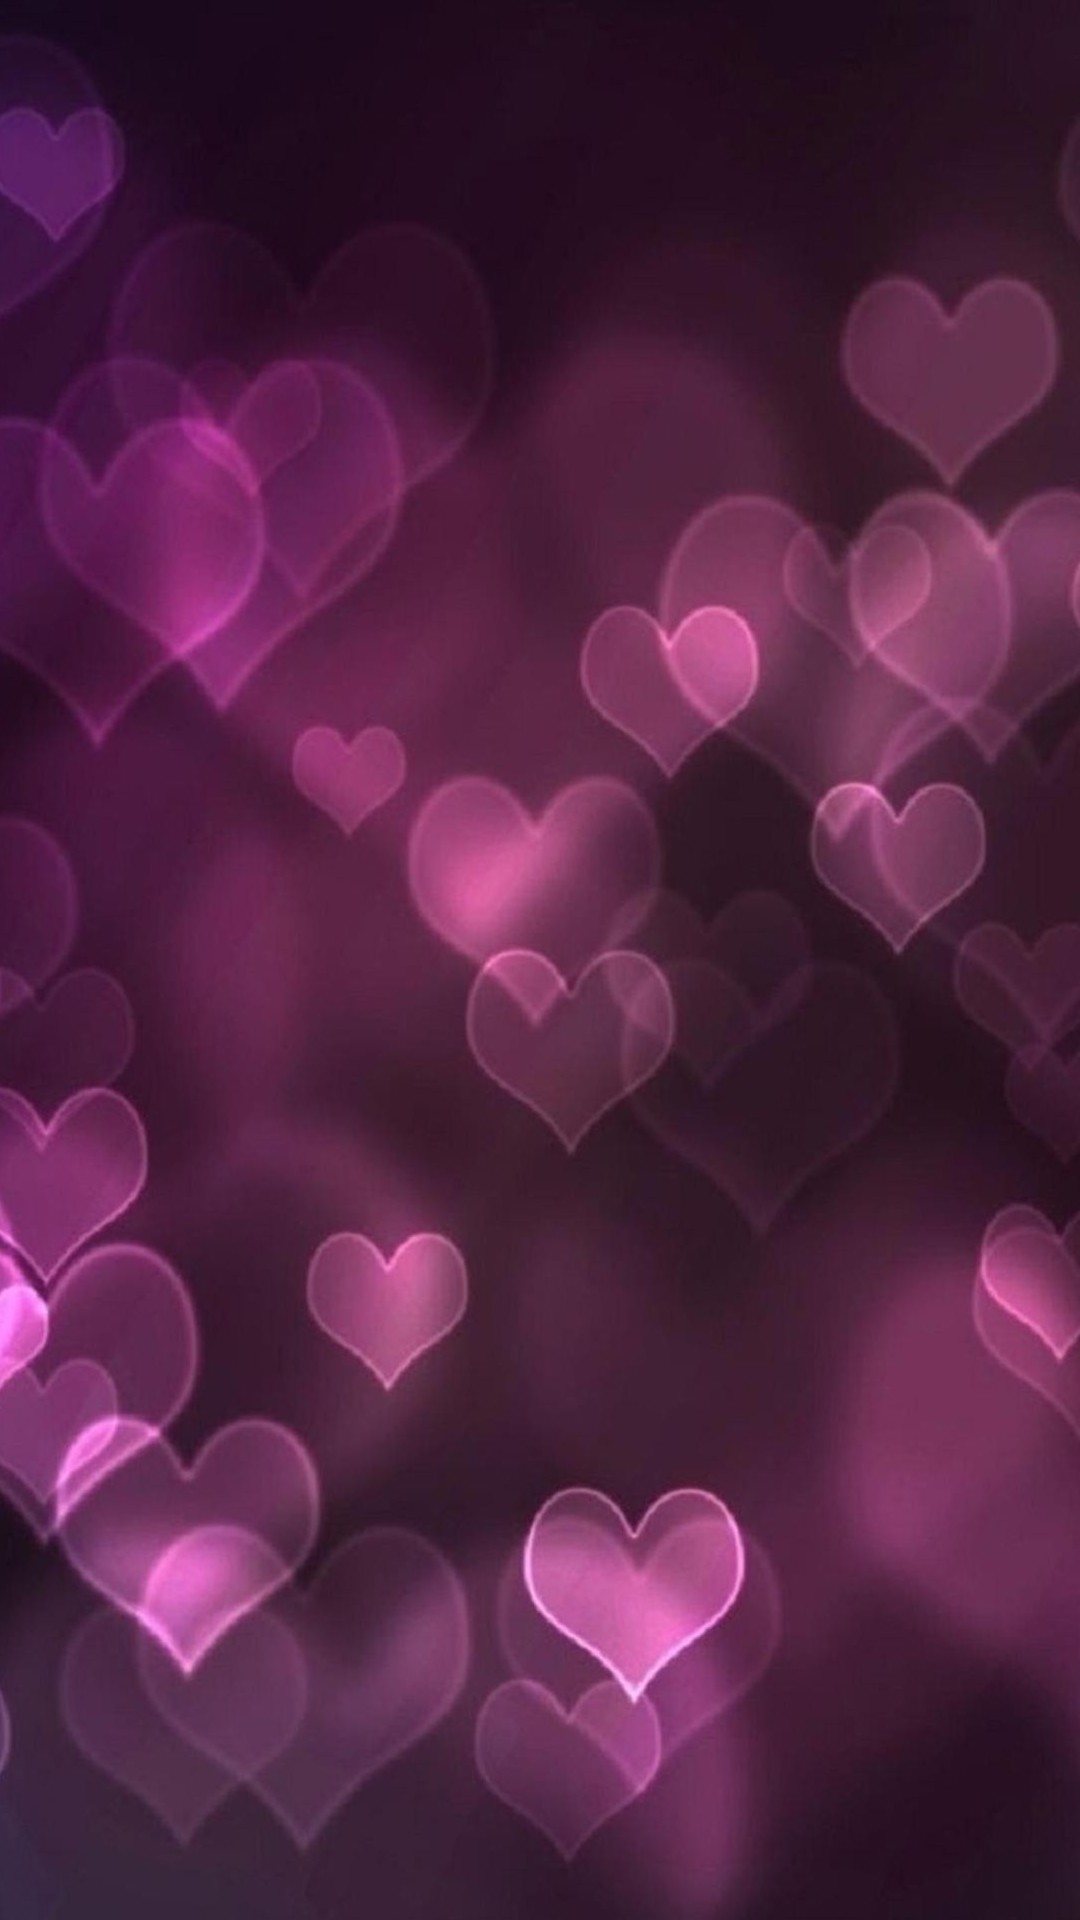 cool pink wallpapers,heart,violet,purple,pink,love